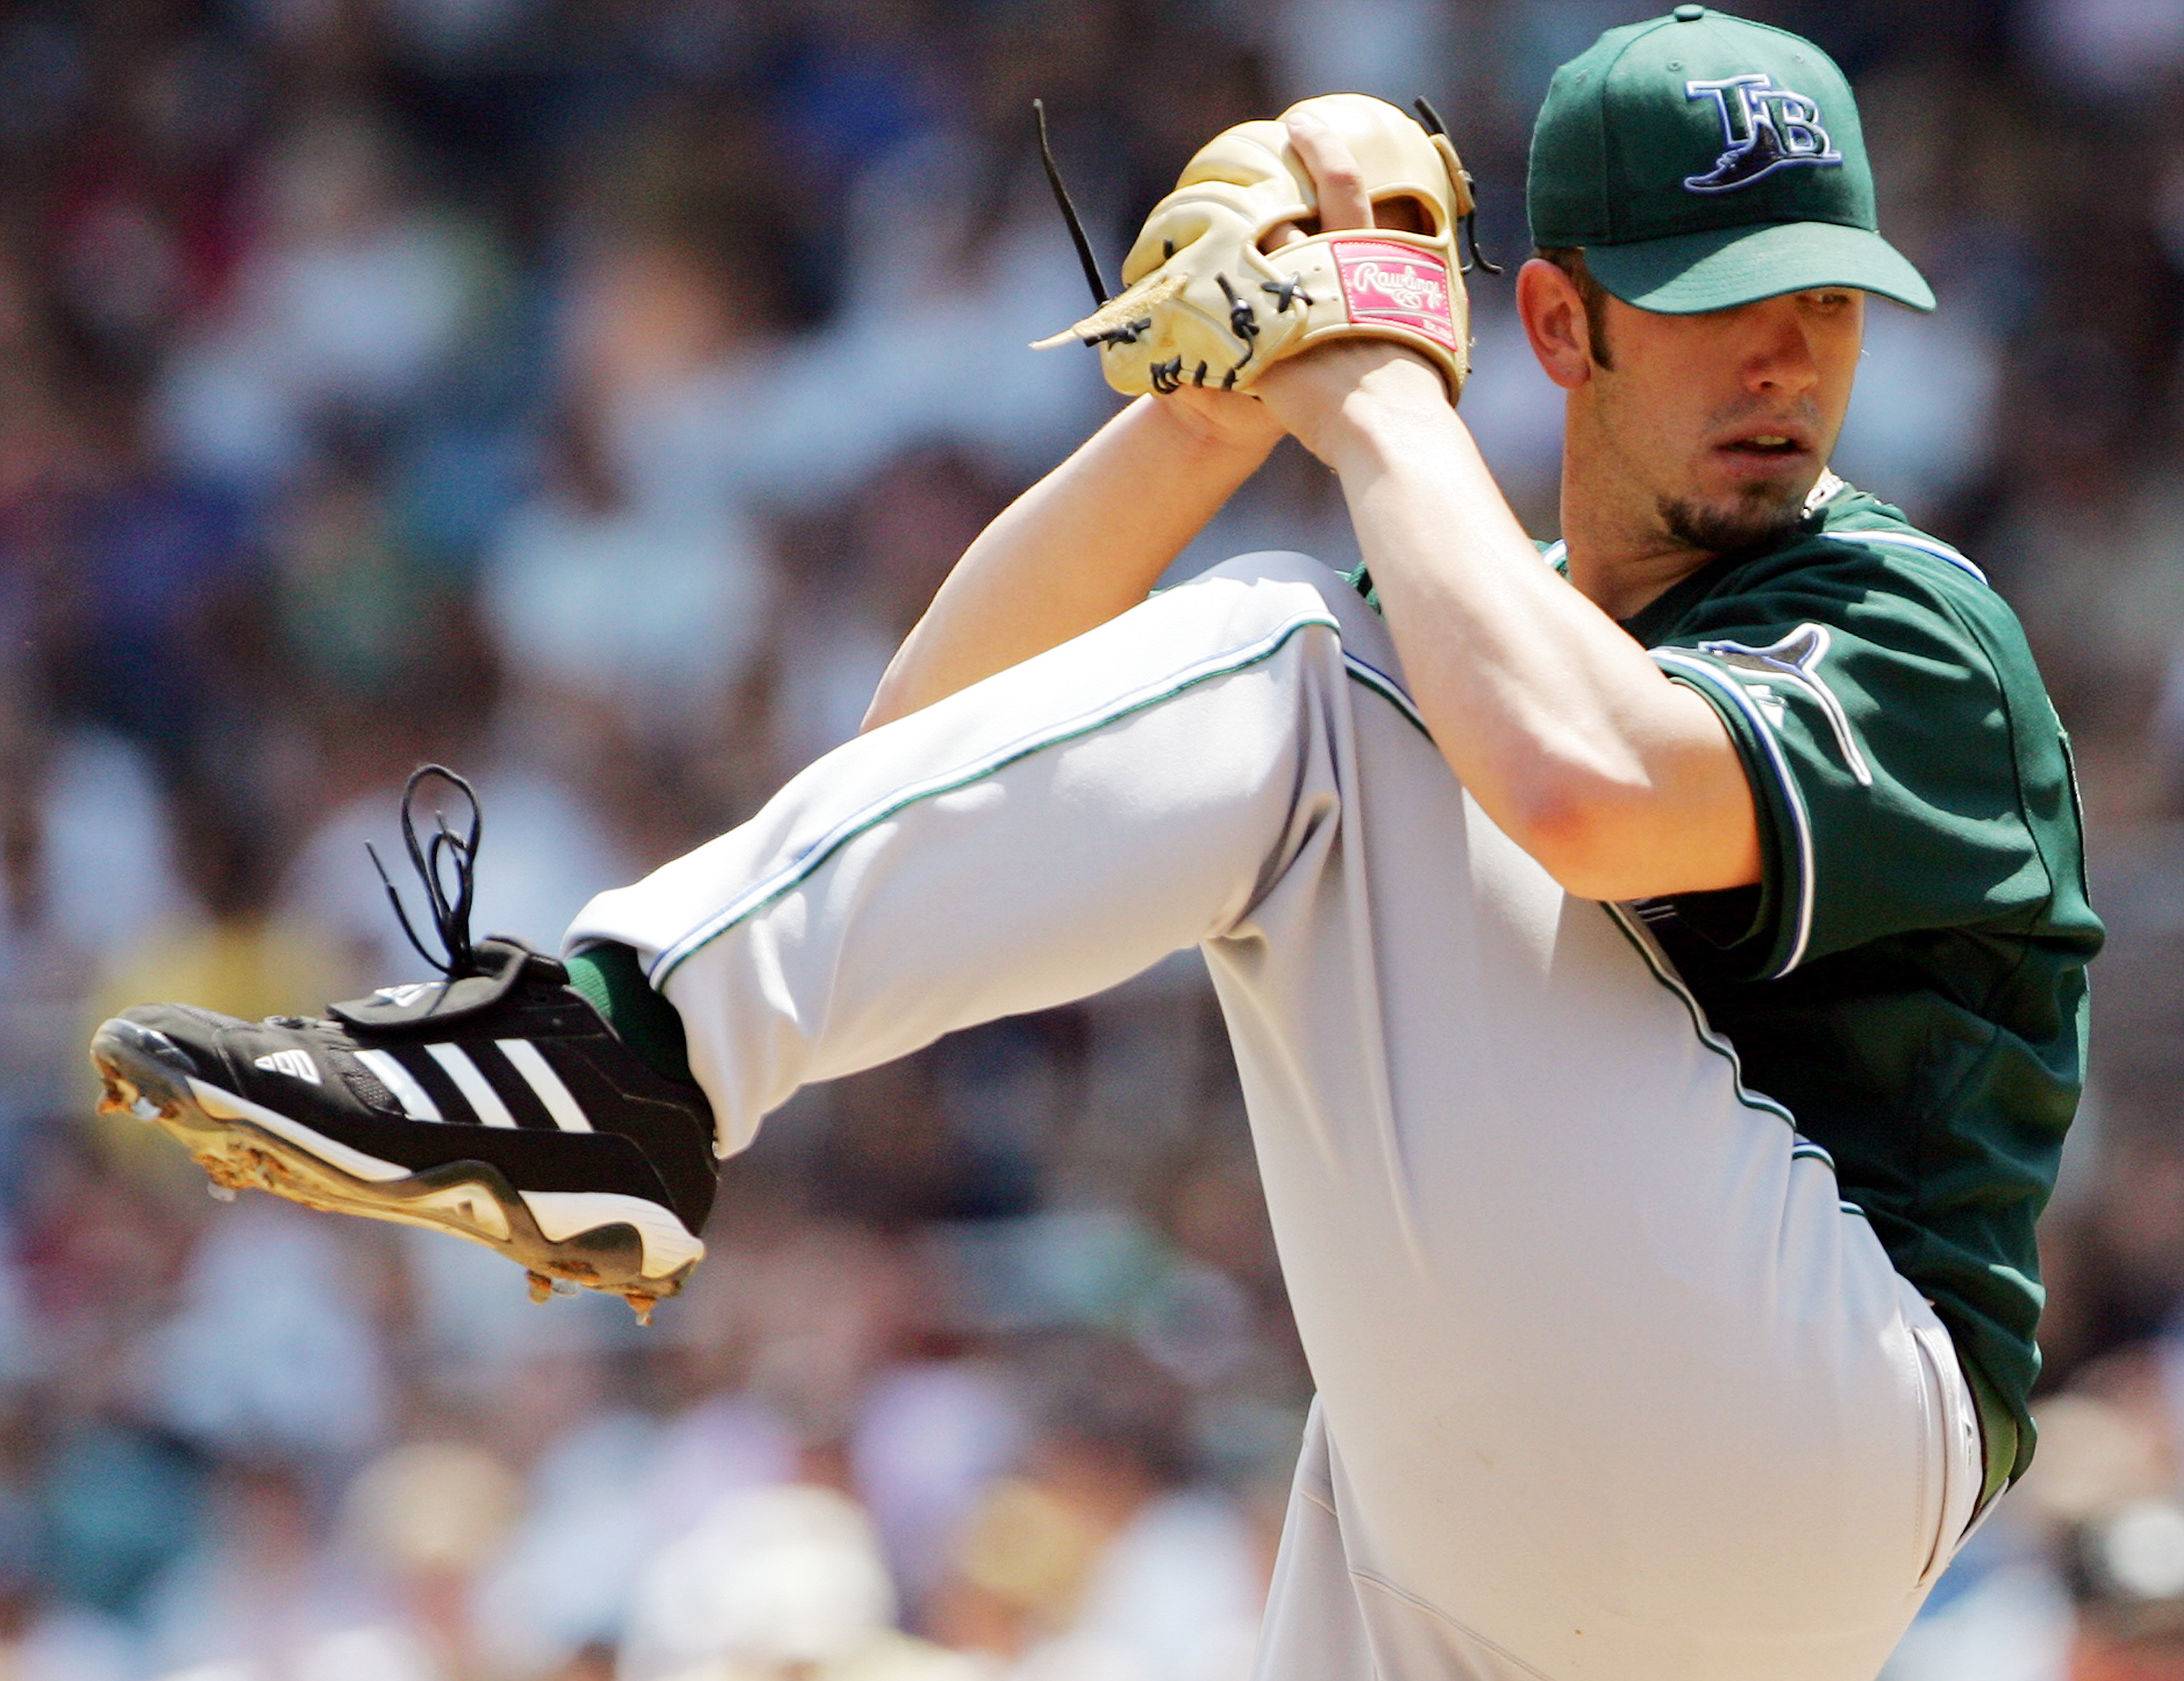 Tampa Bay Devil Rays’ pitcher James Shields delivers home in